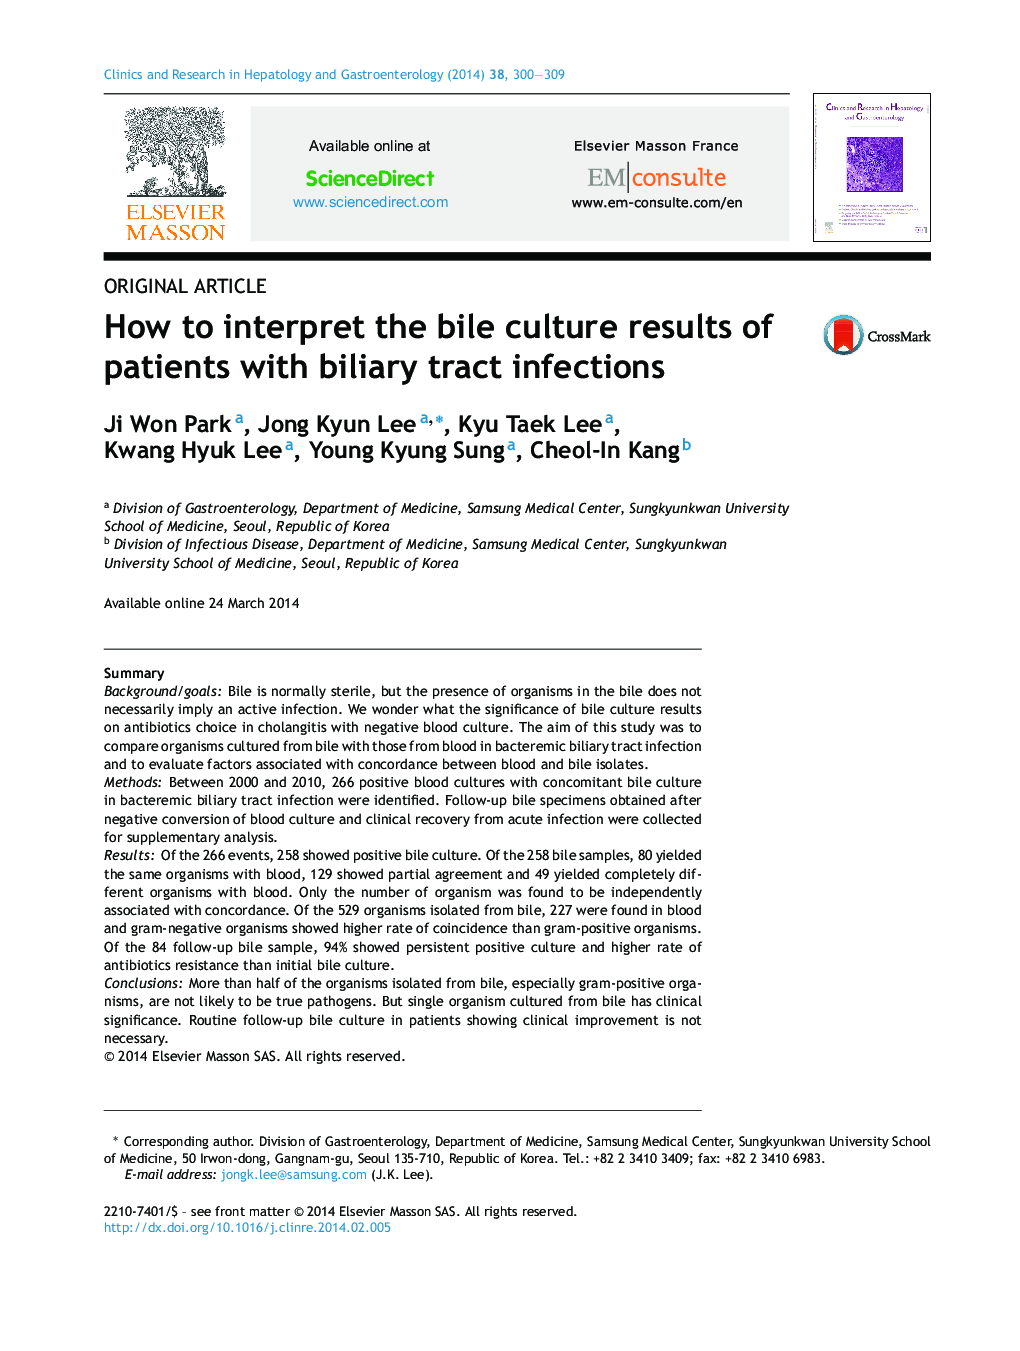 How to interpret the bile culture results of patients with biliary tract infections